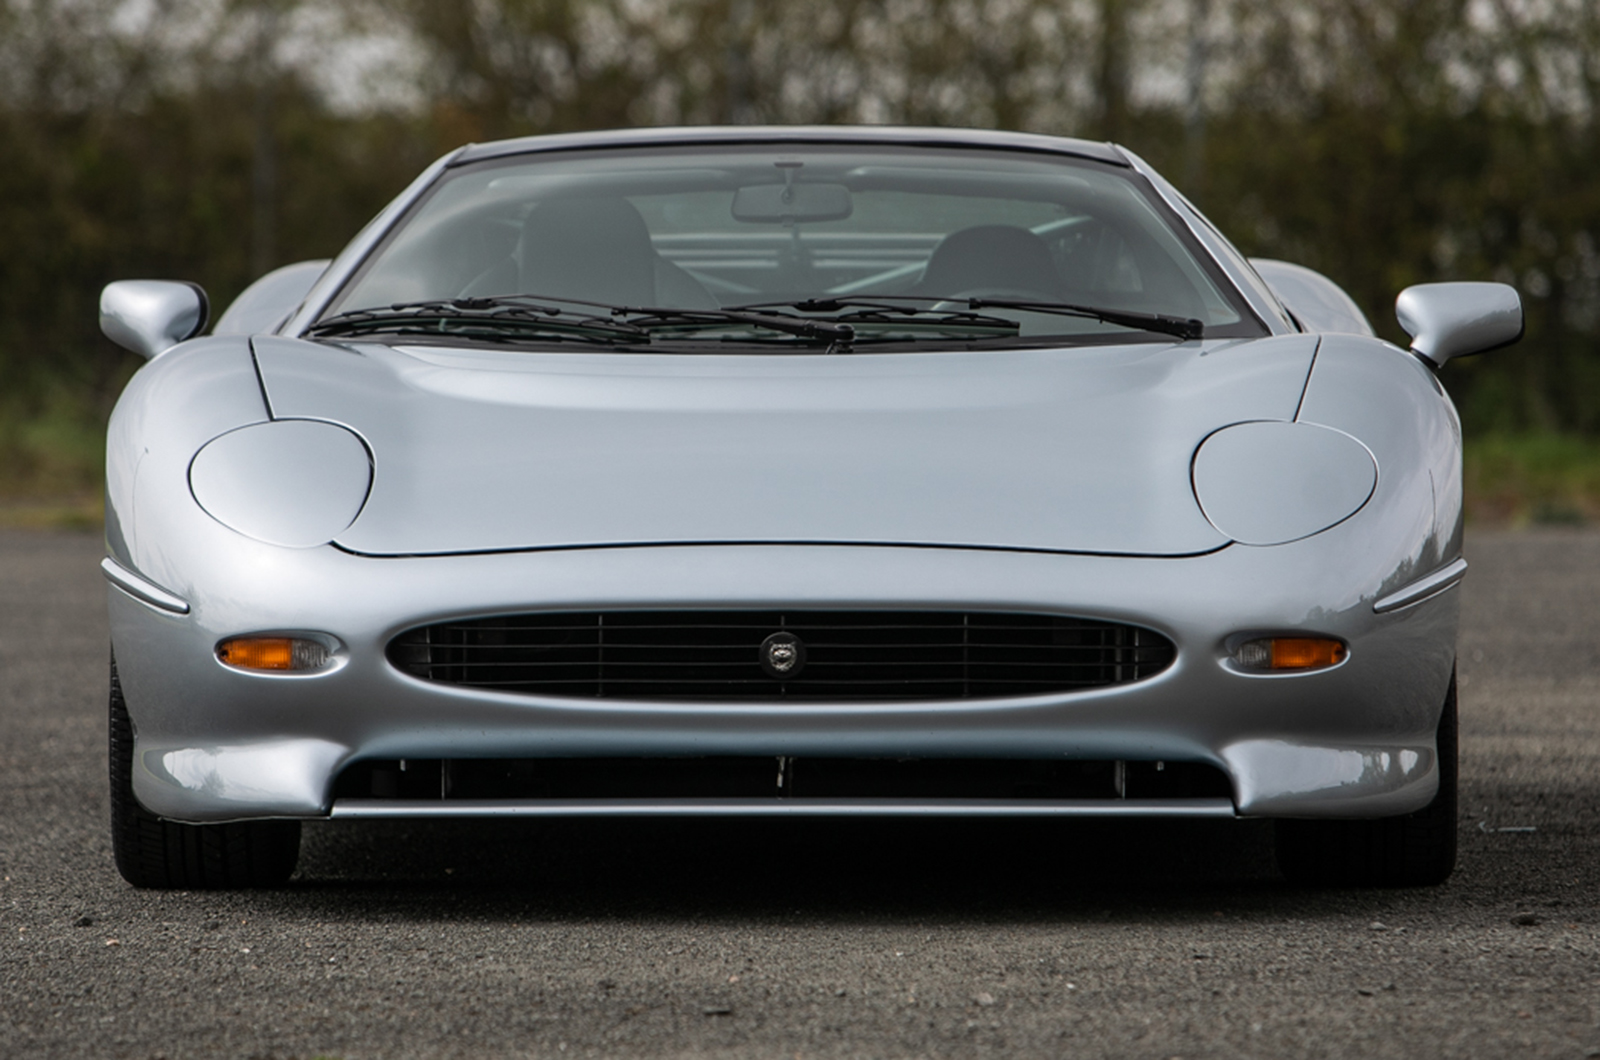 Classic & Sports Car – When did you last see two Jaguar XJ220s in one auction?